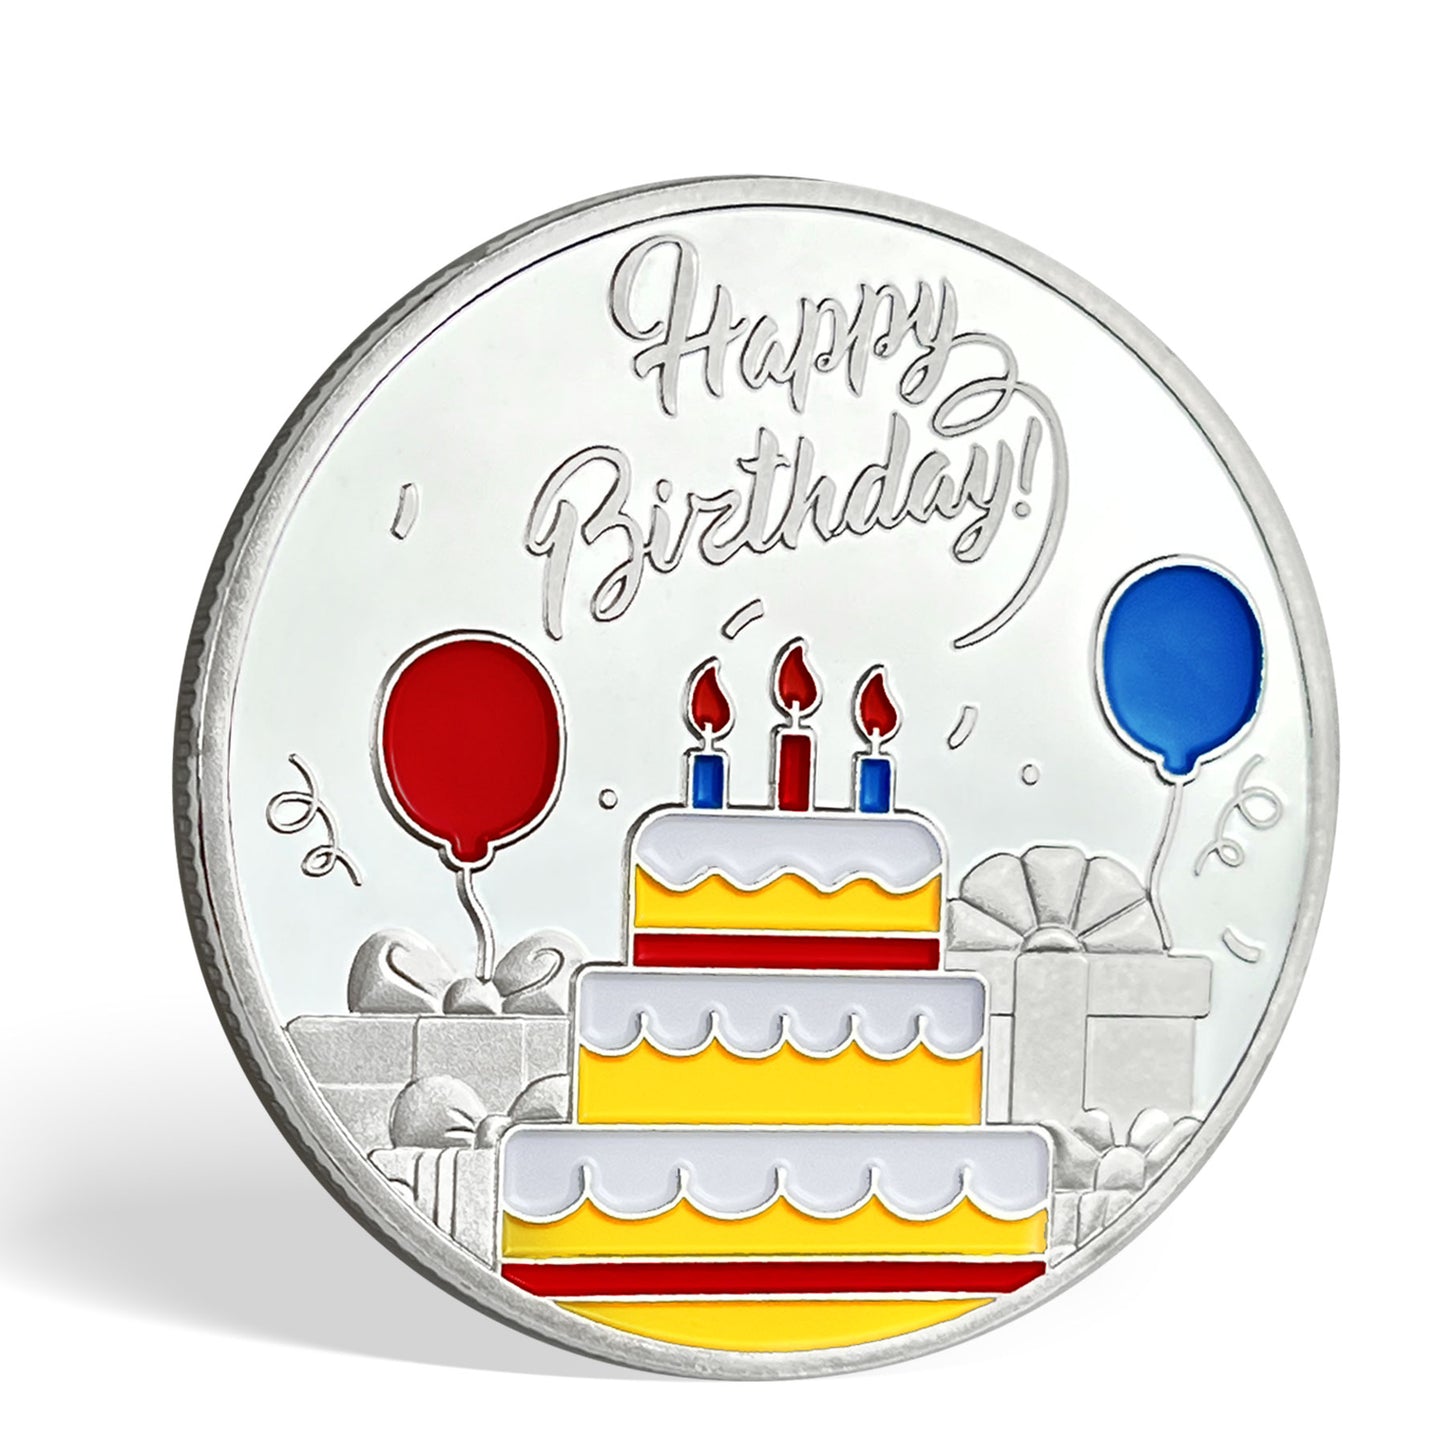 Happy Birthday Coin, Christian Birthday Gifts for Friends for Siblings, Grandson or Granddaughter, Boys & Girls, Red and Blue Balloon